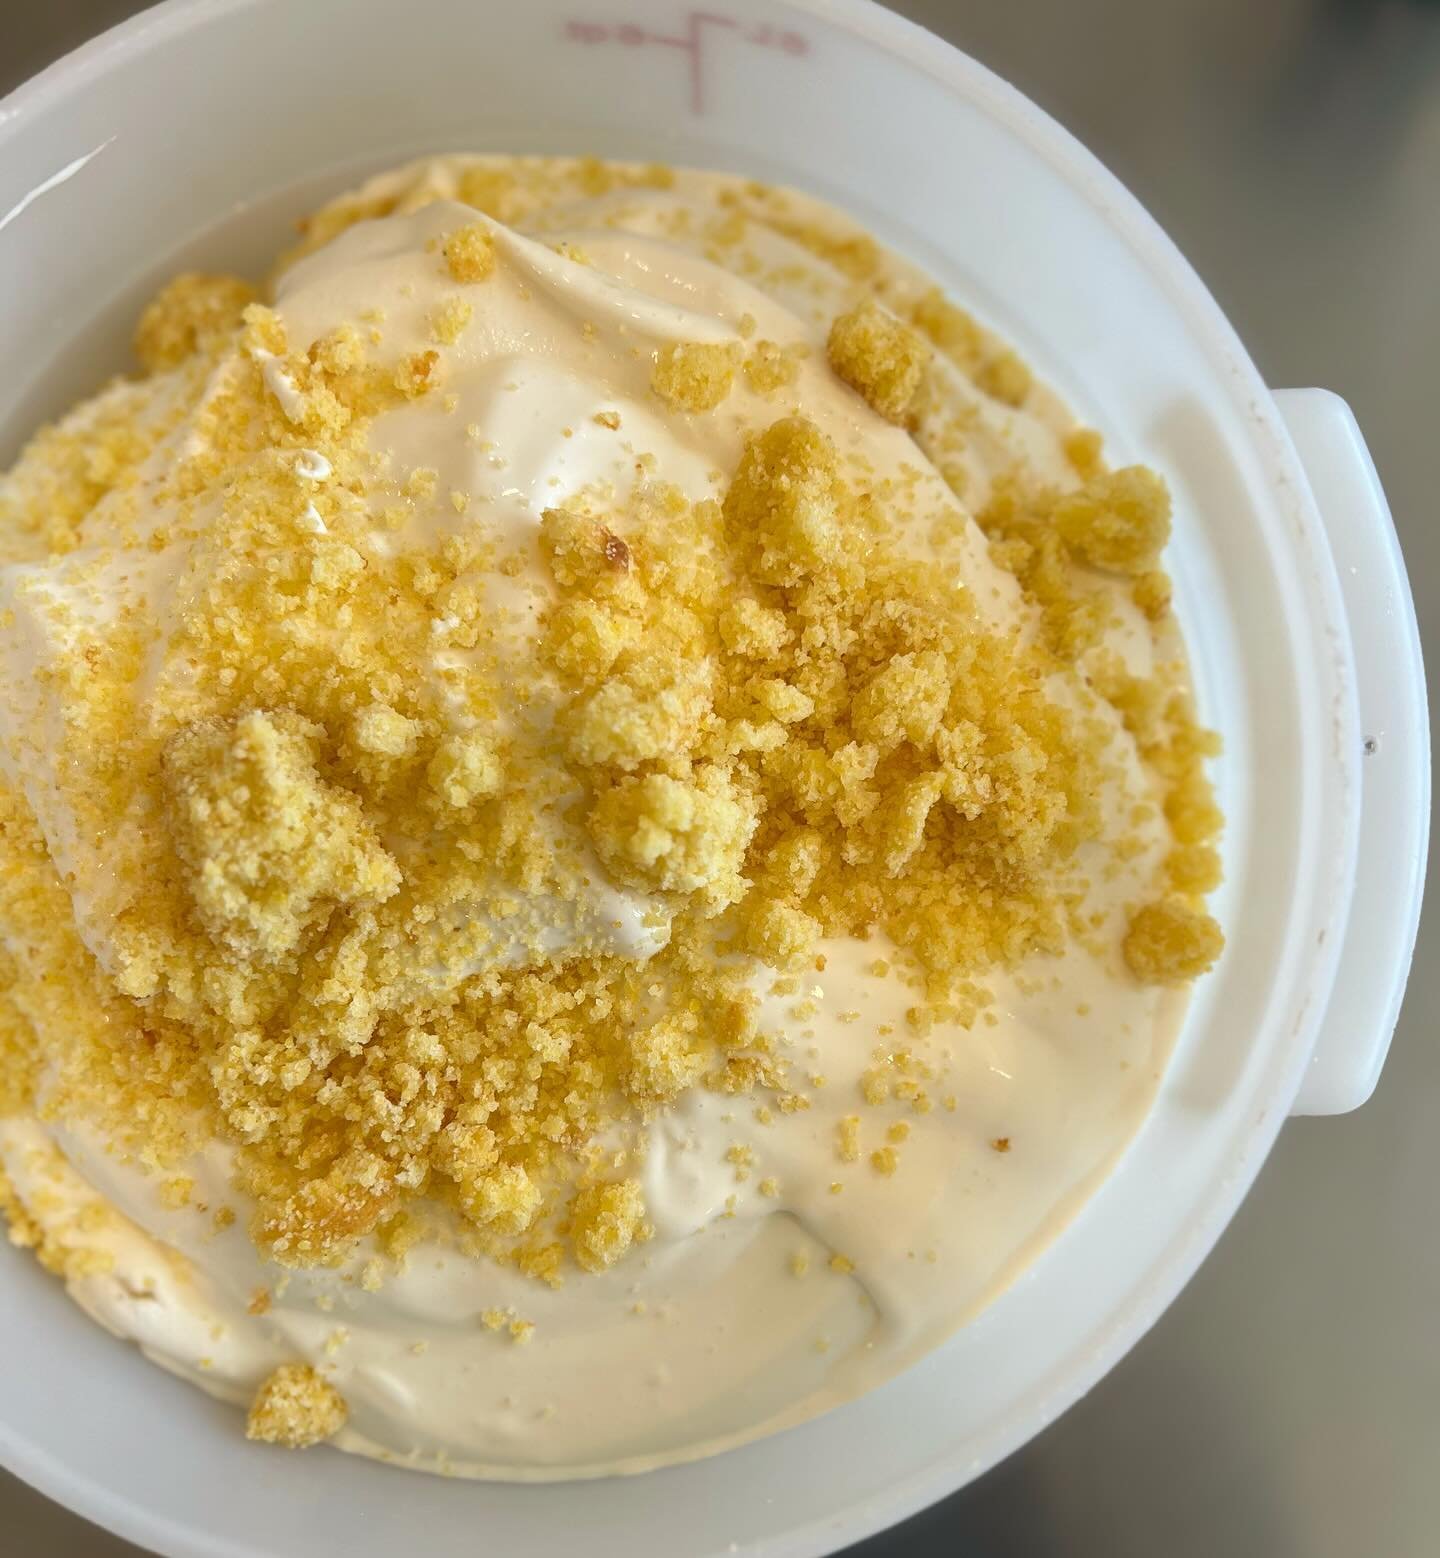 Thank you to everyone who came out this weekend to celebrate the warm weather☀️with some ice cream!🍦

We&rsquo;ll be announcing new flavors on Wednesday but until then, here&rsquo;s a little teaser&hellip;cough🌽🍞🍯cough

Lots of fun ones in store 